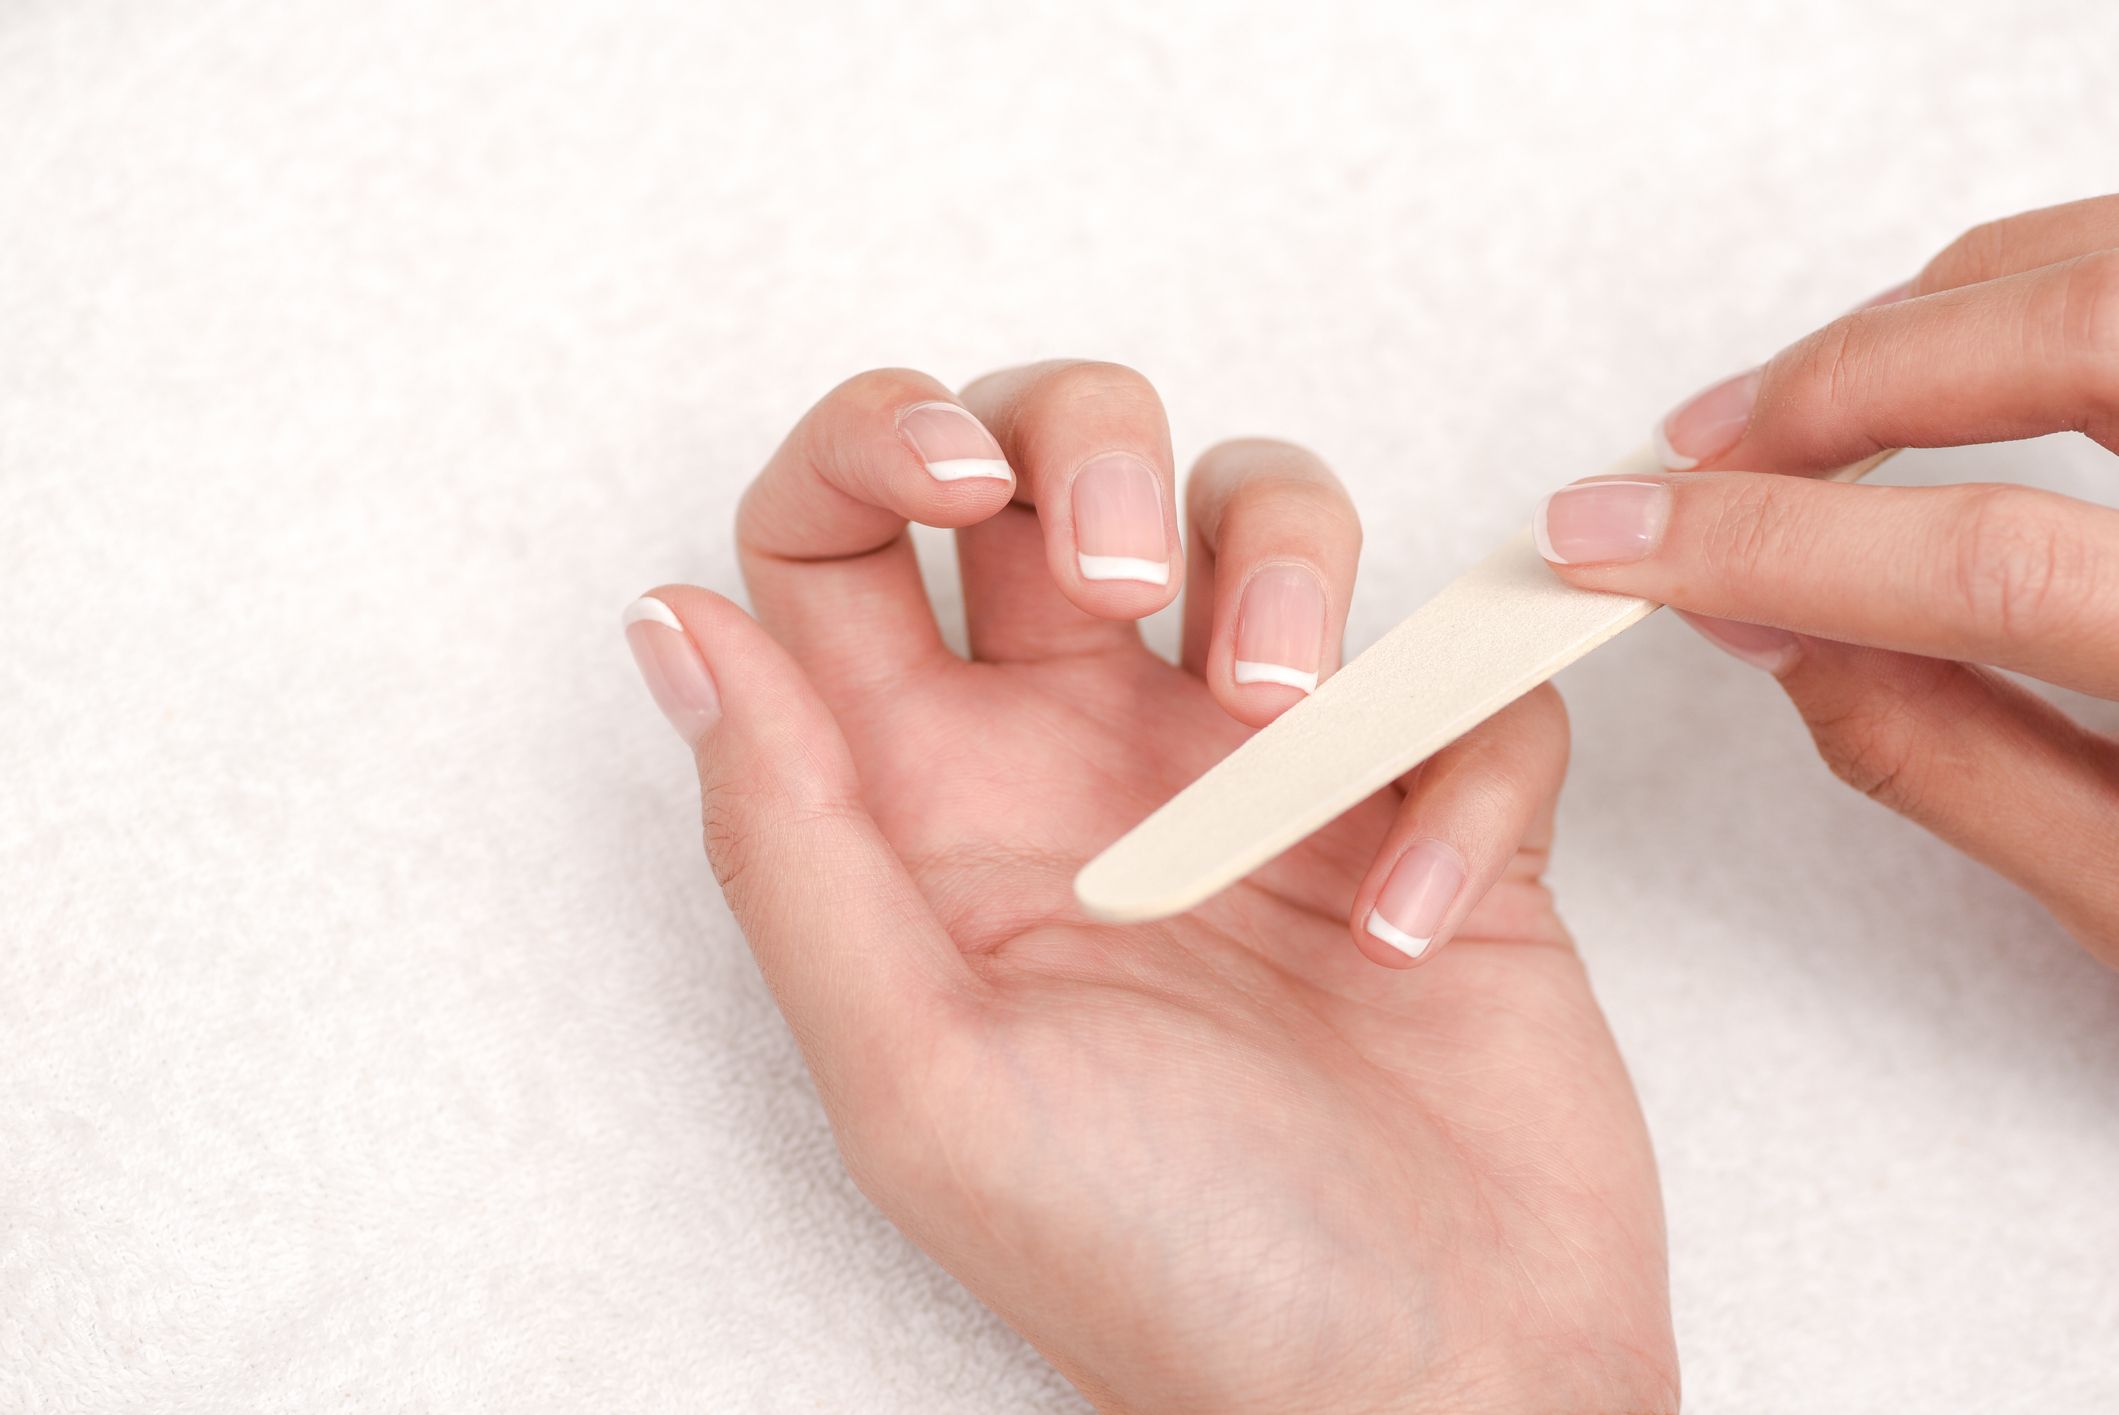 Why Is The Skin Around Your Nails Peeling? - By Dr. Lakshmi Manasi | Lybrate